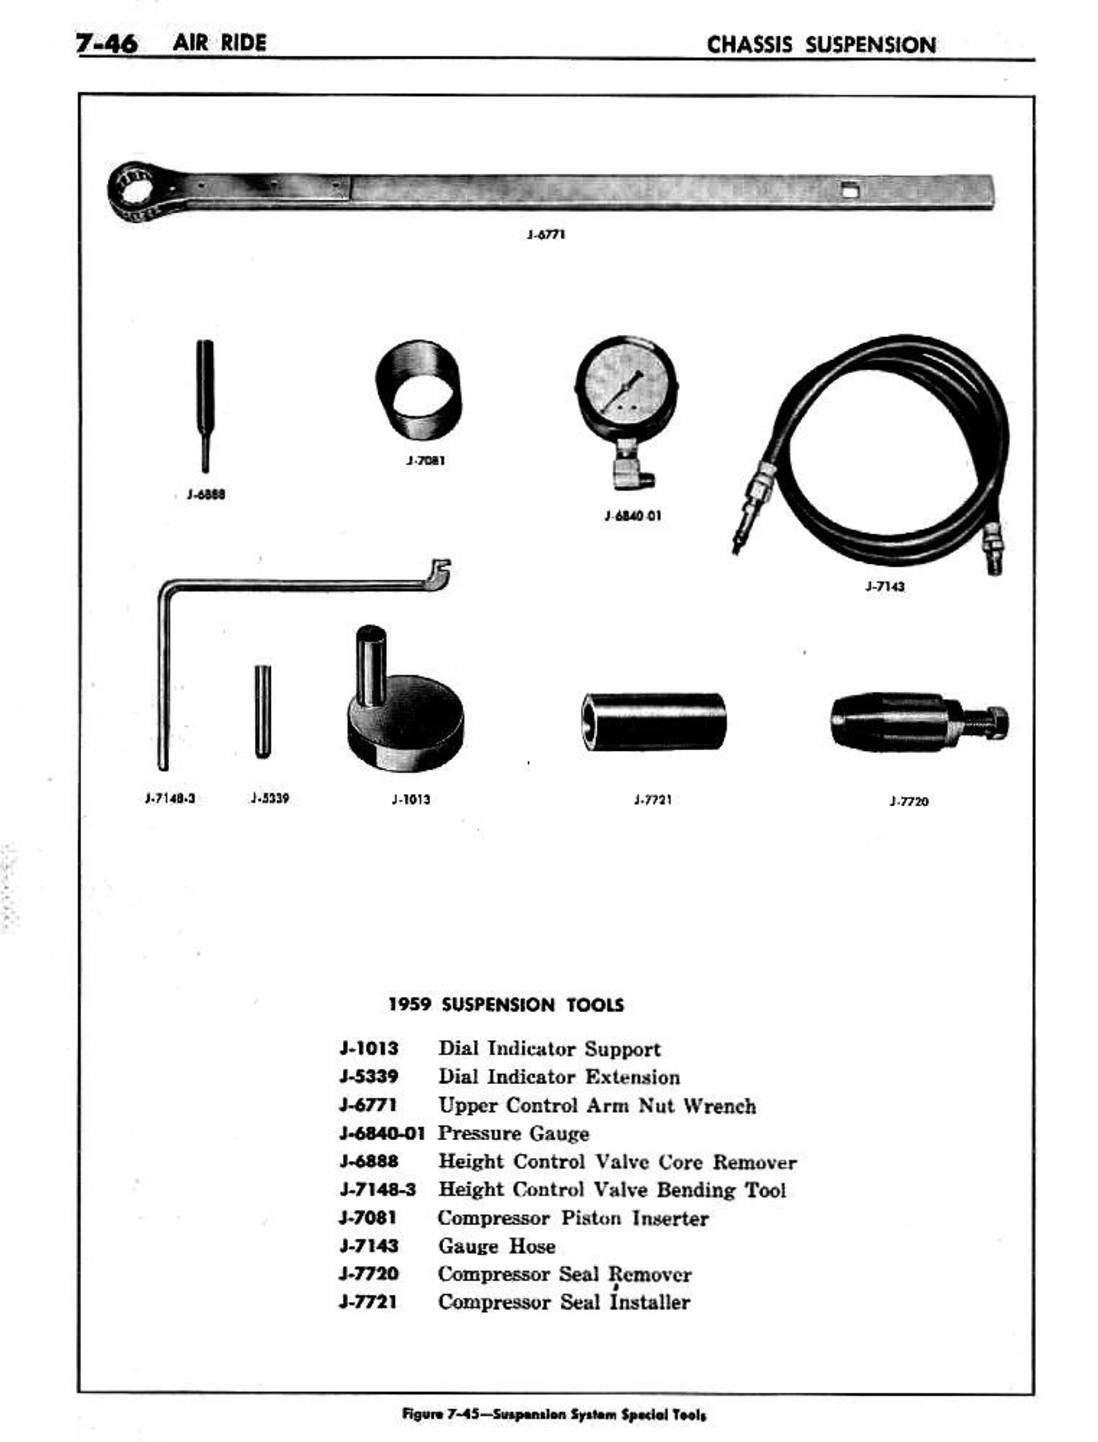 n_08 1959 Buick Shop Manual - Chassis Suspension-046-046.jpg